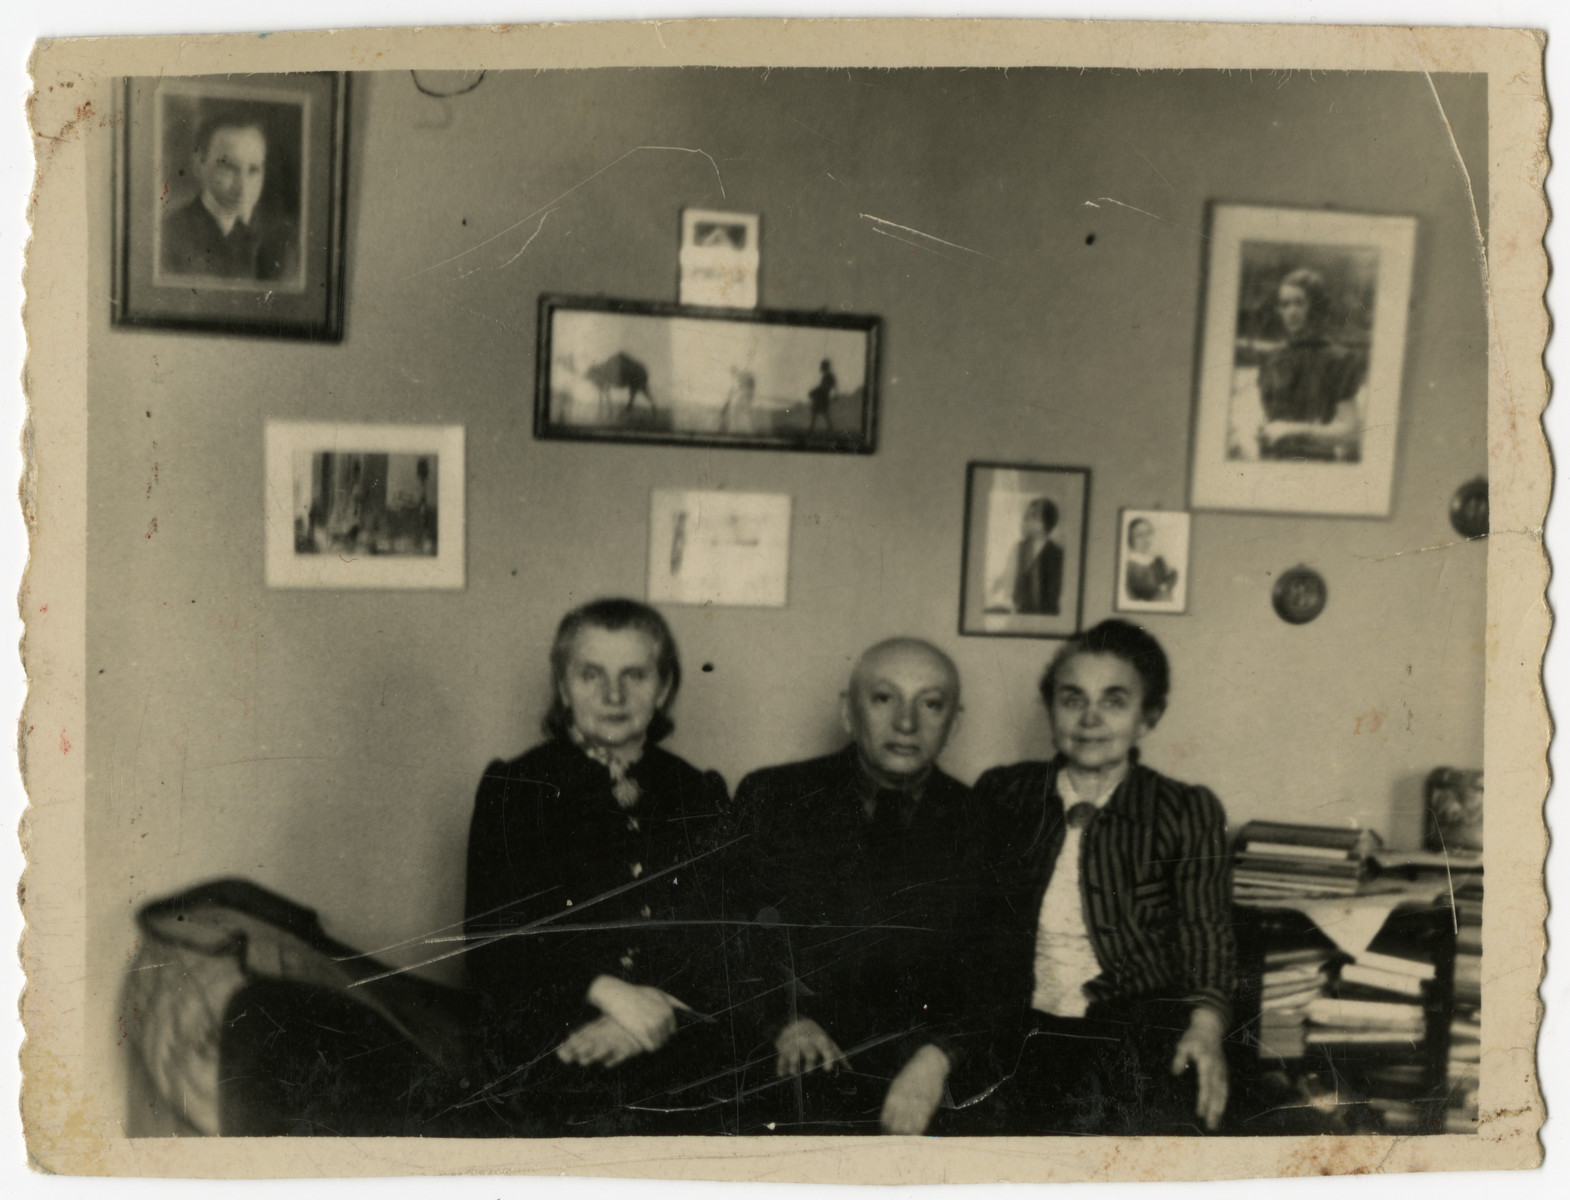 Three elderly Jews pose in their apartment in the Otwock ghetto.

From left to right are Regina and Benjamin Szymin and Regina's sister, Malka Flint.